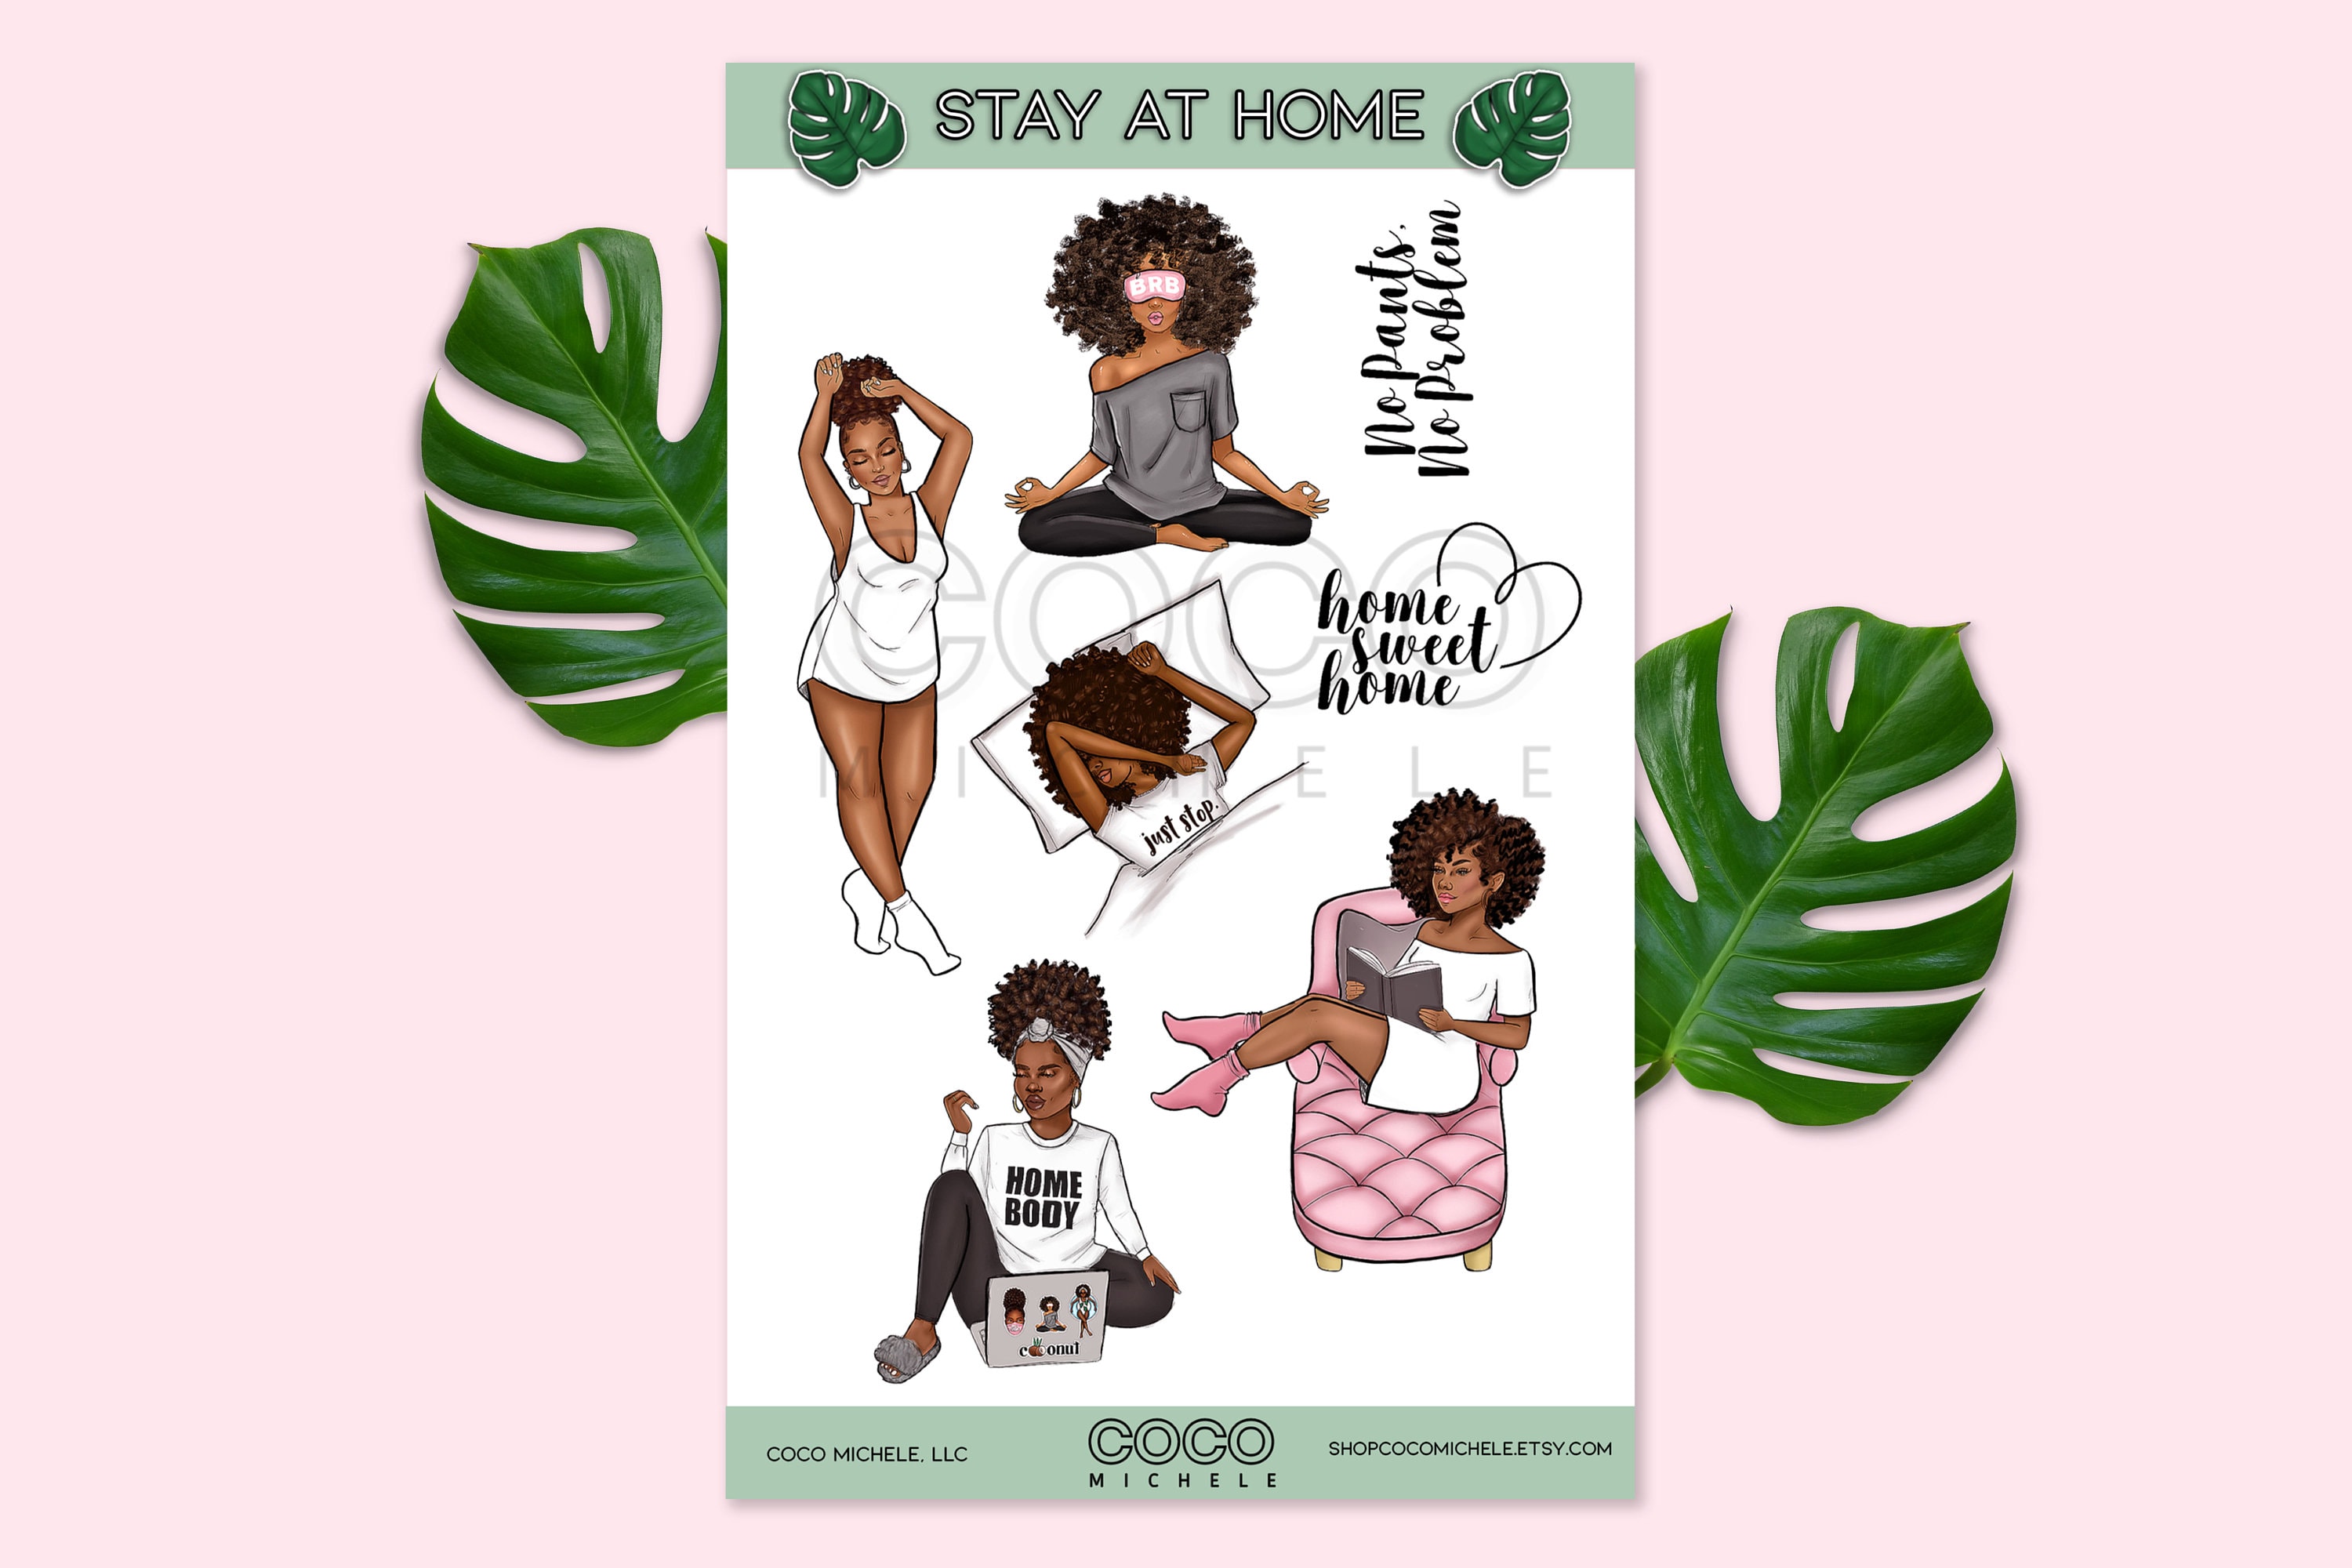 Black Girl Digital Planner Stickers, Black Girl Clipart, Black Women  Digital Planner Stickers, Self Care Stickers, for Black Girl Quotes 